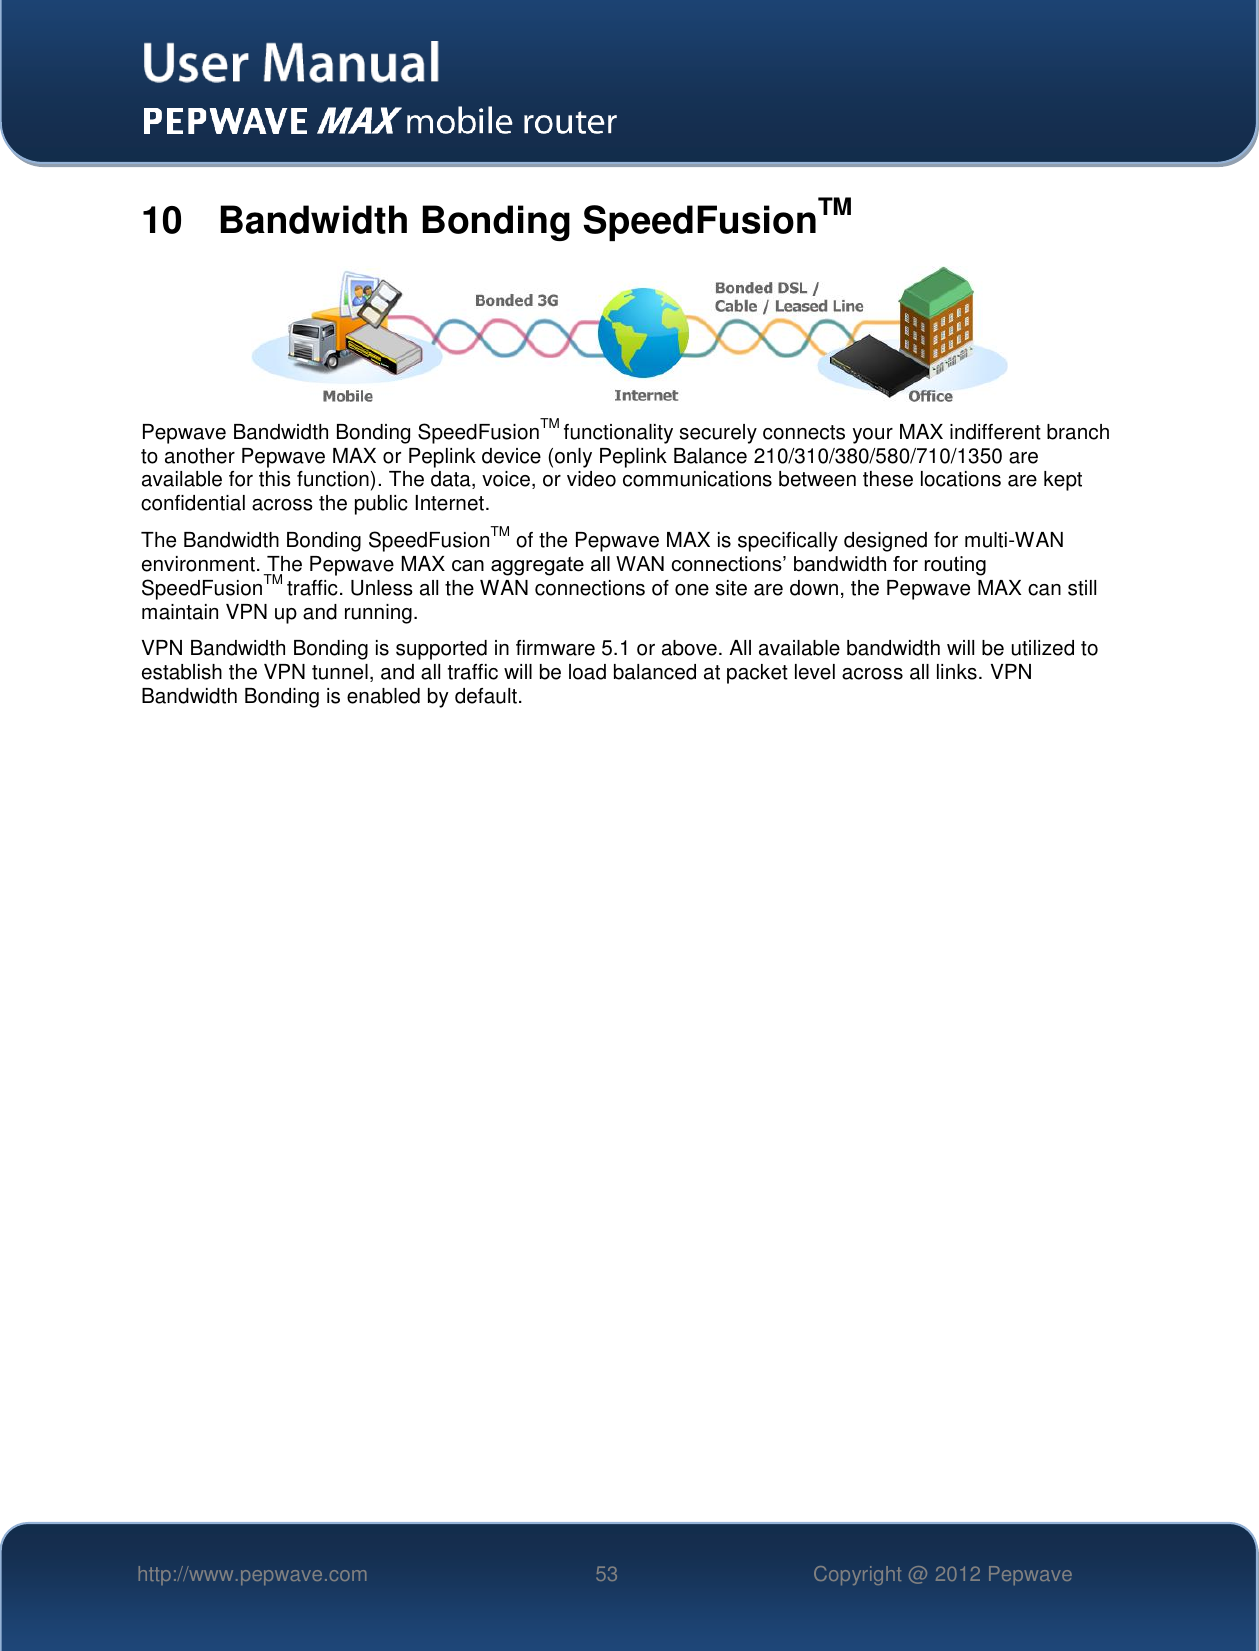   http://www.pepwave.com 53 Copyright @ 2012 Pepwave   10  Bandwidth Bonding SpeedFusionTM  Pepwave Bandwidth Bonding SpeedFusionTM functionality securely connects your MAX indifferent branch to another Pepwave MAX or Peplink device (only Peplink Balance 210/310/380/580/710/1350 are available for this function). The data, voice, or video communications between these locations are kept confidential across the public Internet. The Bandwidth Bonding SpeedFusionTM of the Pepwave MAX is specifically designed for multi-WAN environment. The Pepwave MAX can aggregate all WAN connections’ bandwidth for routing SpeedFusionTM traffic. Unless all the WAN connections of one site are down, the Pepwave MAX can still maintain VPN up and running. VPN Bandwidth Bonding is supported in firmware 5.1 or above. All available bandwidth will be utilized to establish the VPN tunnel, and all traffic will be load balanced at packet level across all links. VPN Bandwidth Bonding is enabled by default.      